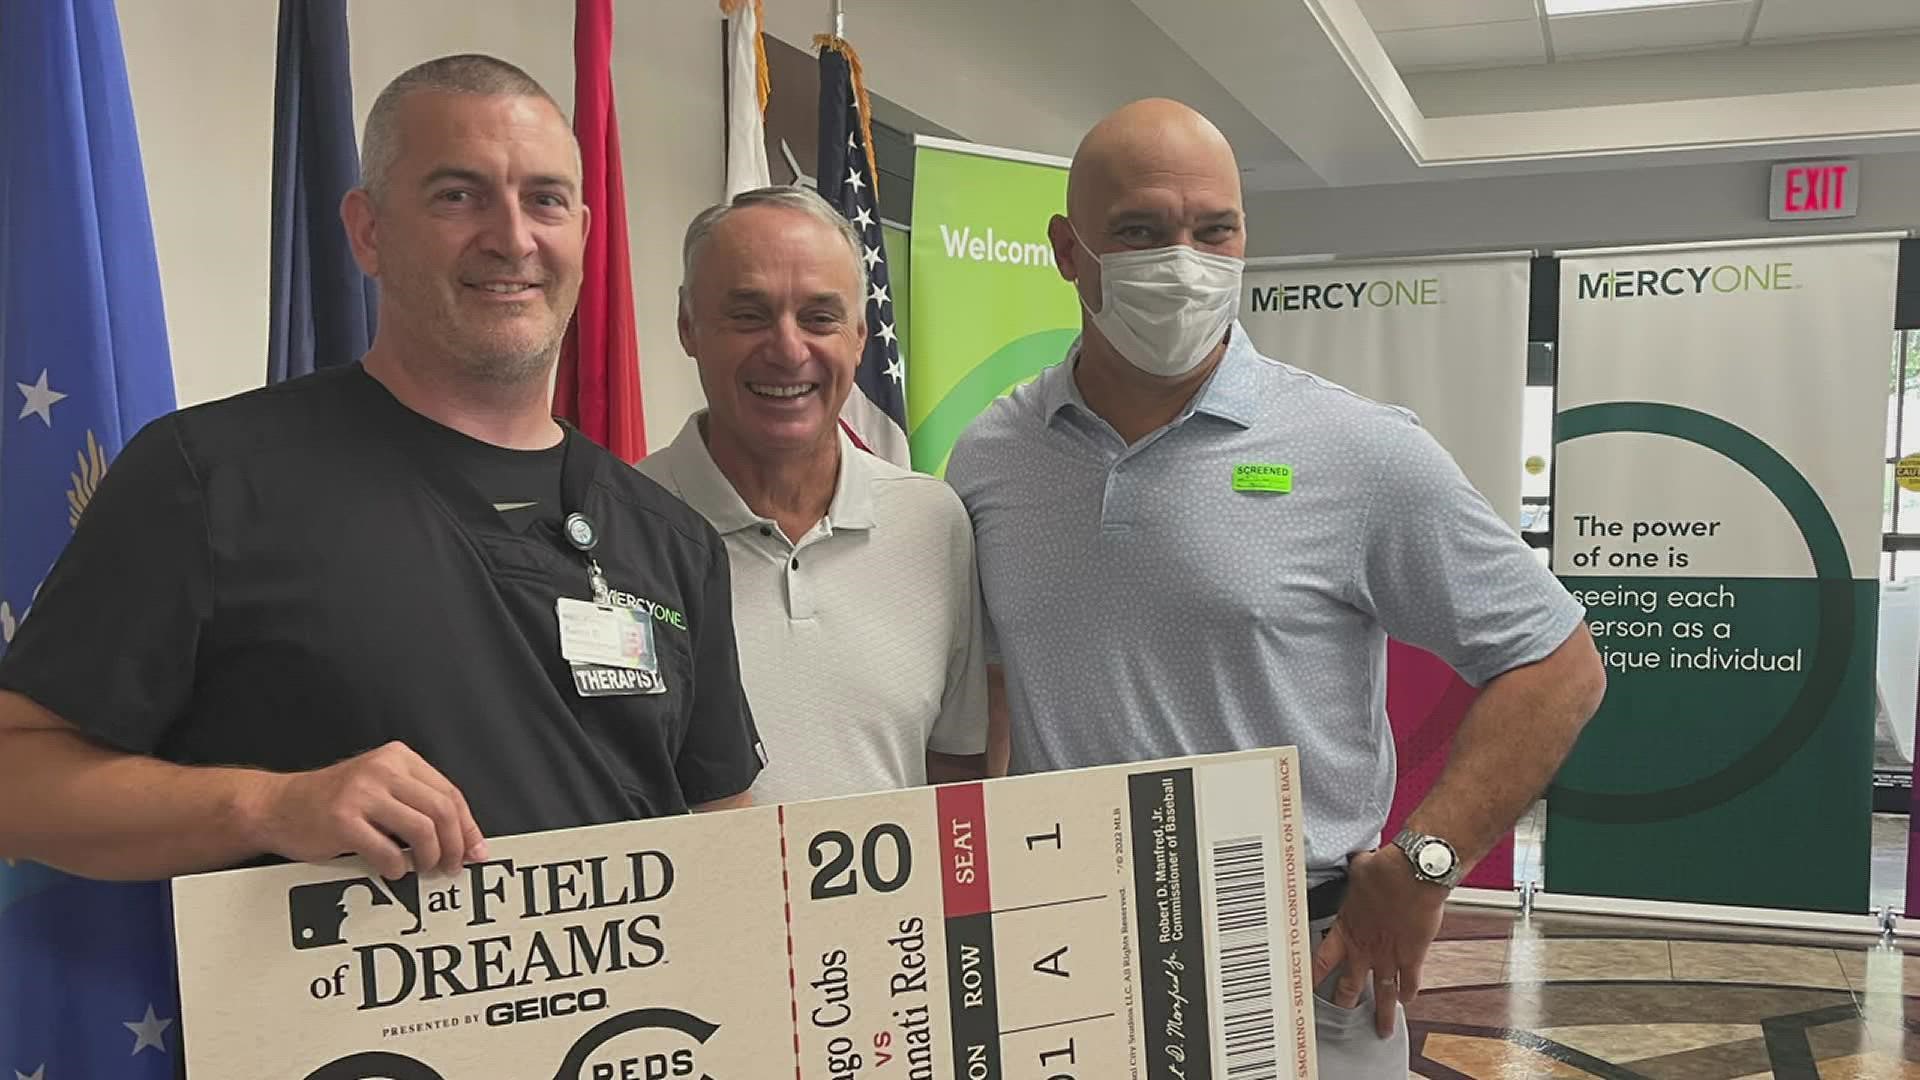 The MLB chief operations and strategy officer and the senior vice president of field operations personally handed over the tickets at MercyOne in Dubuque.